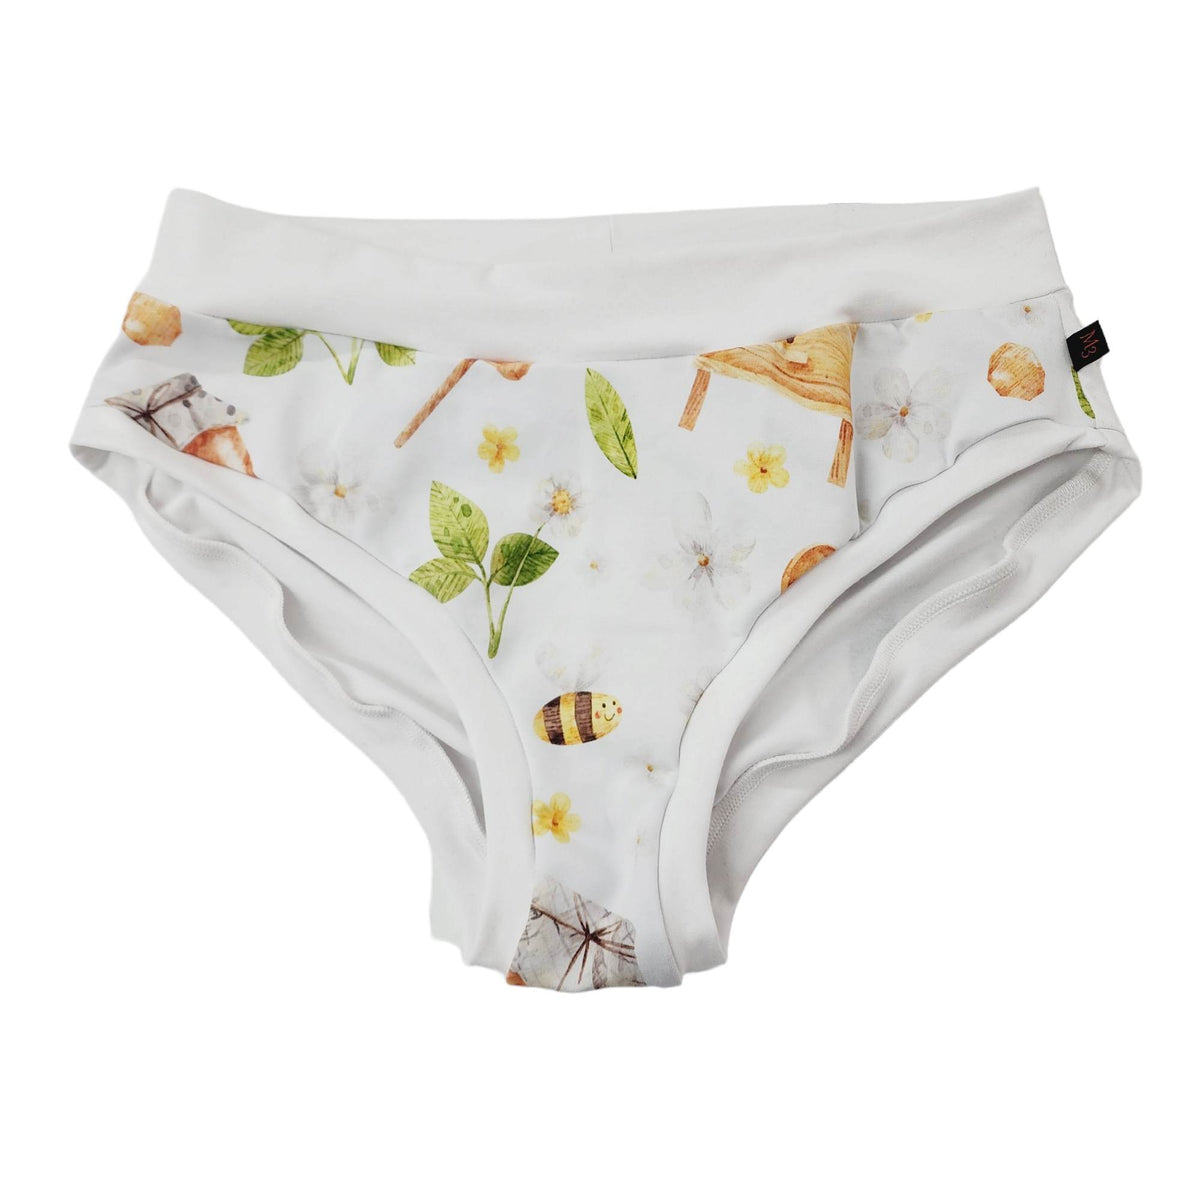 M3 Creations | Adult underwear | Beekeeping (ready to go)